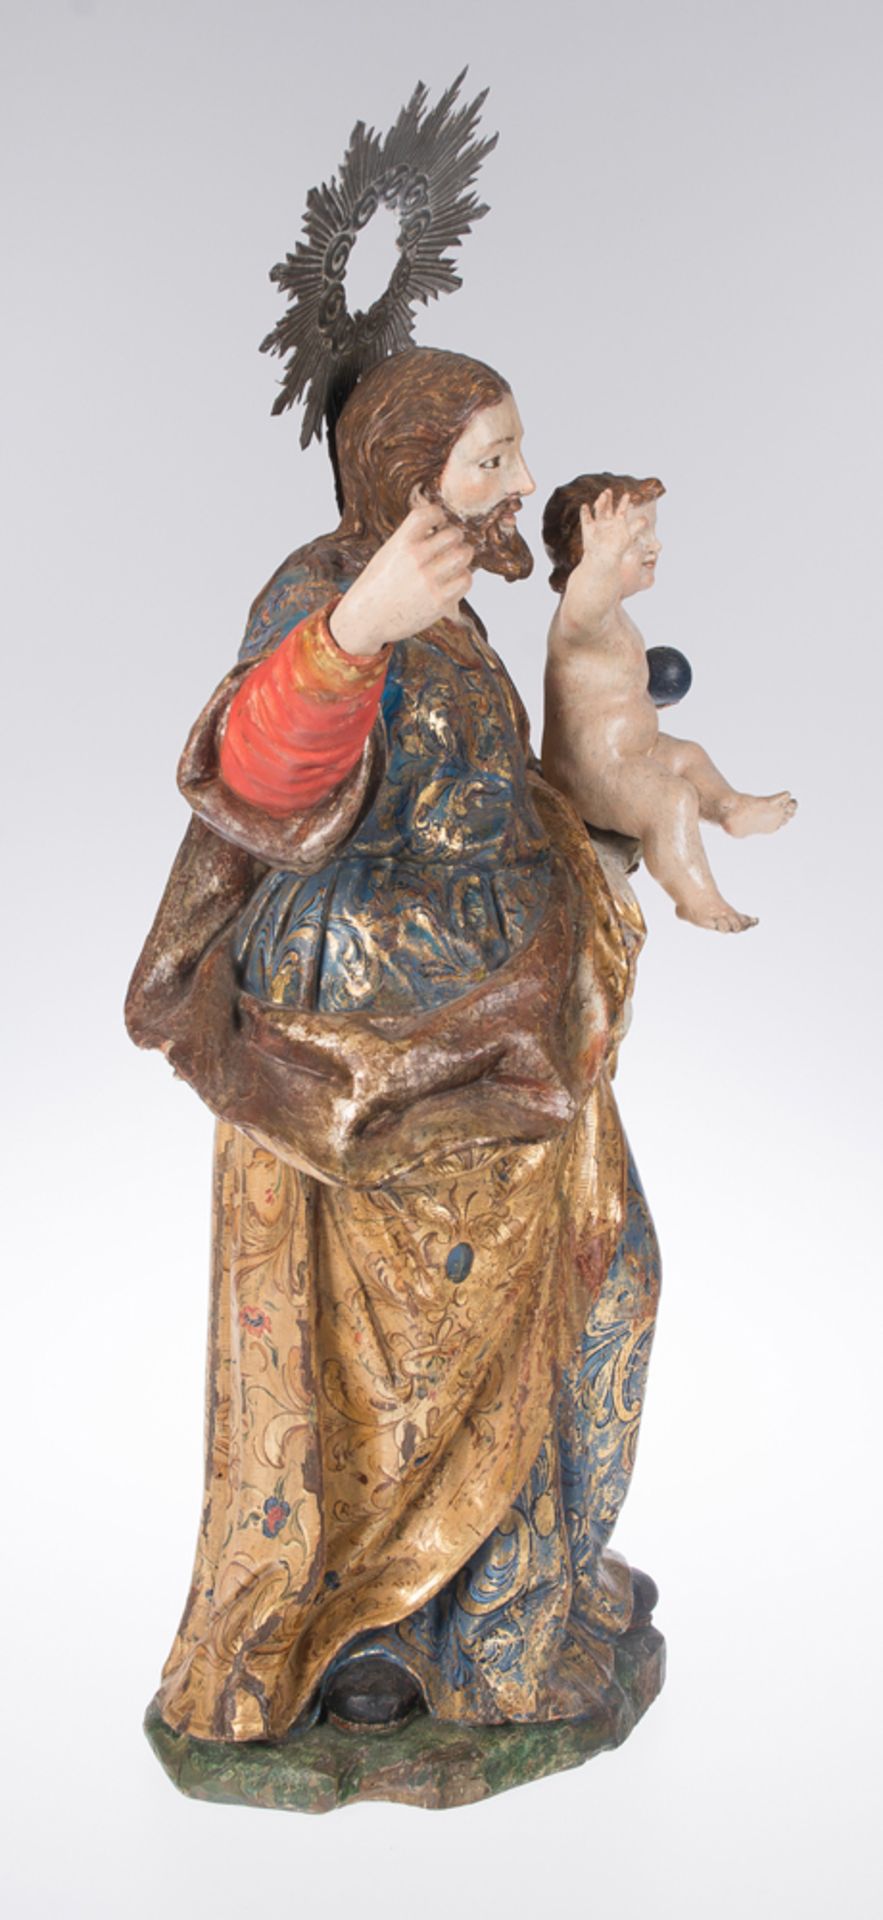 "Saint Joseph with the Christ Child". Carved, gilded and polychromed wooden sculpture. Spanish Scho - Image 3 of 6